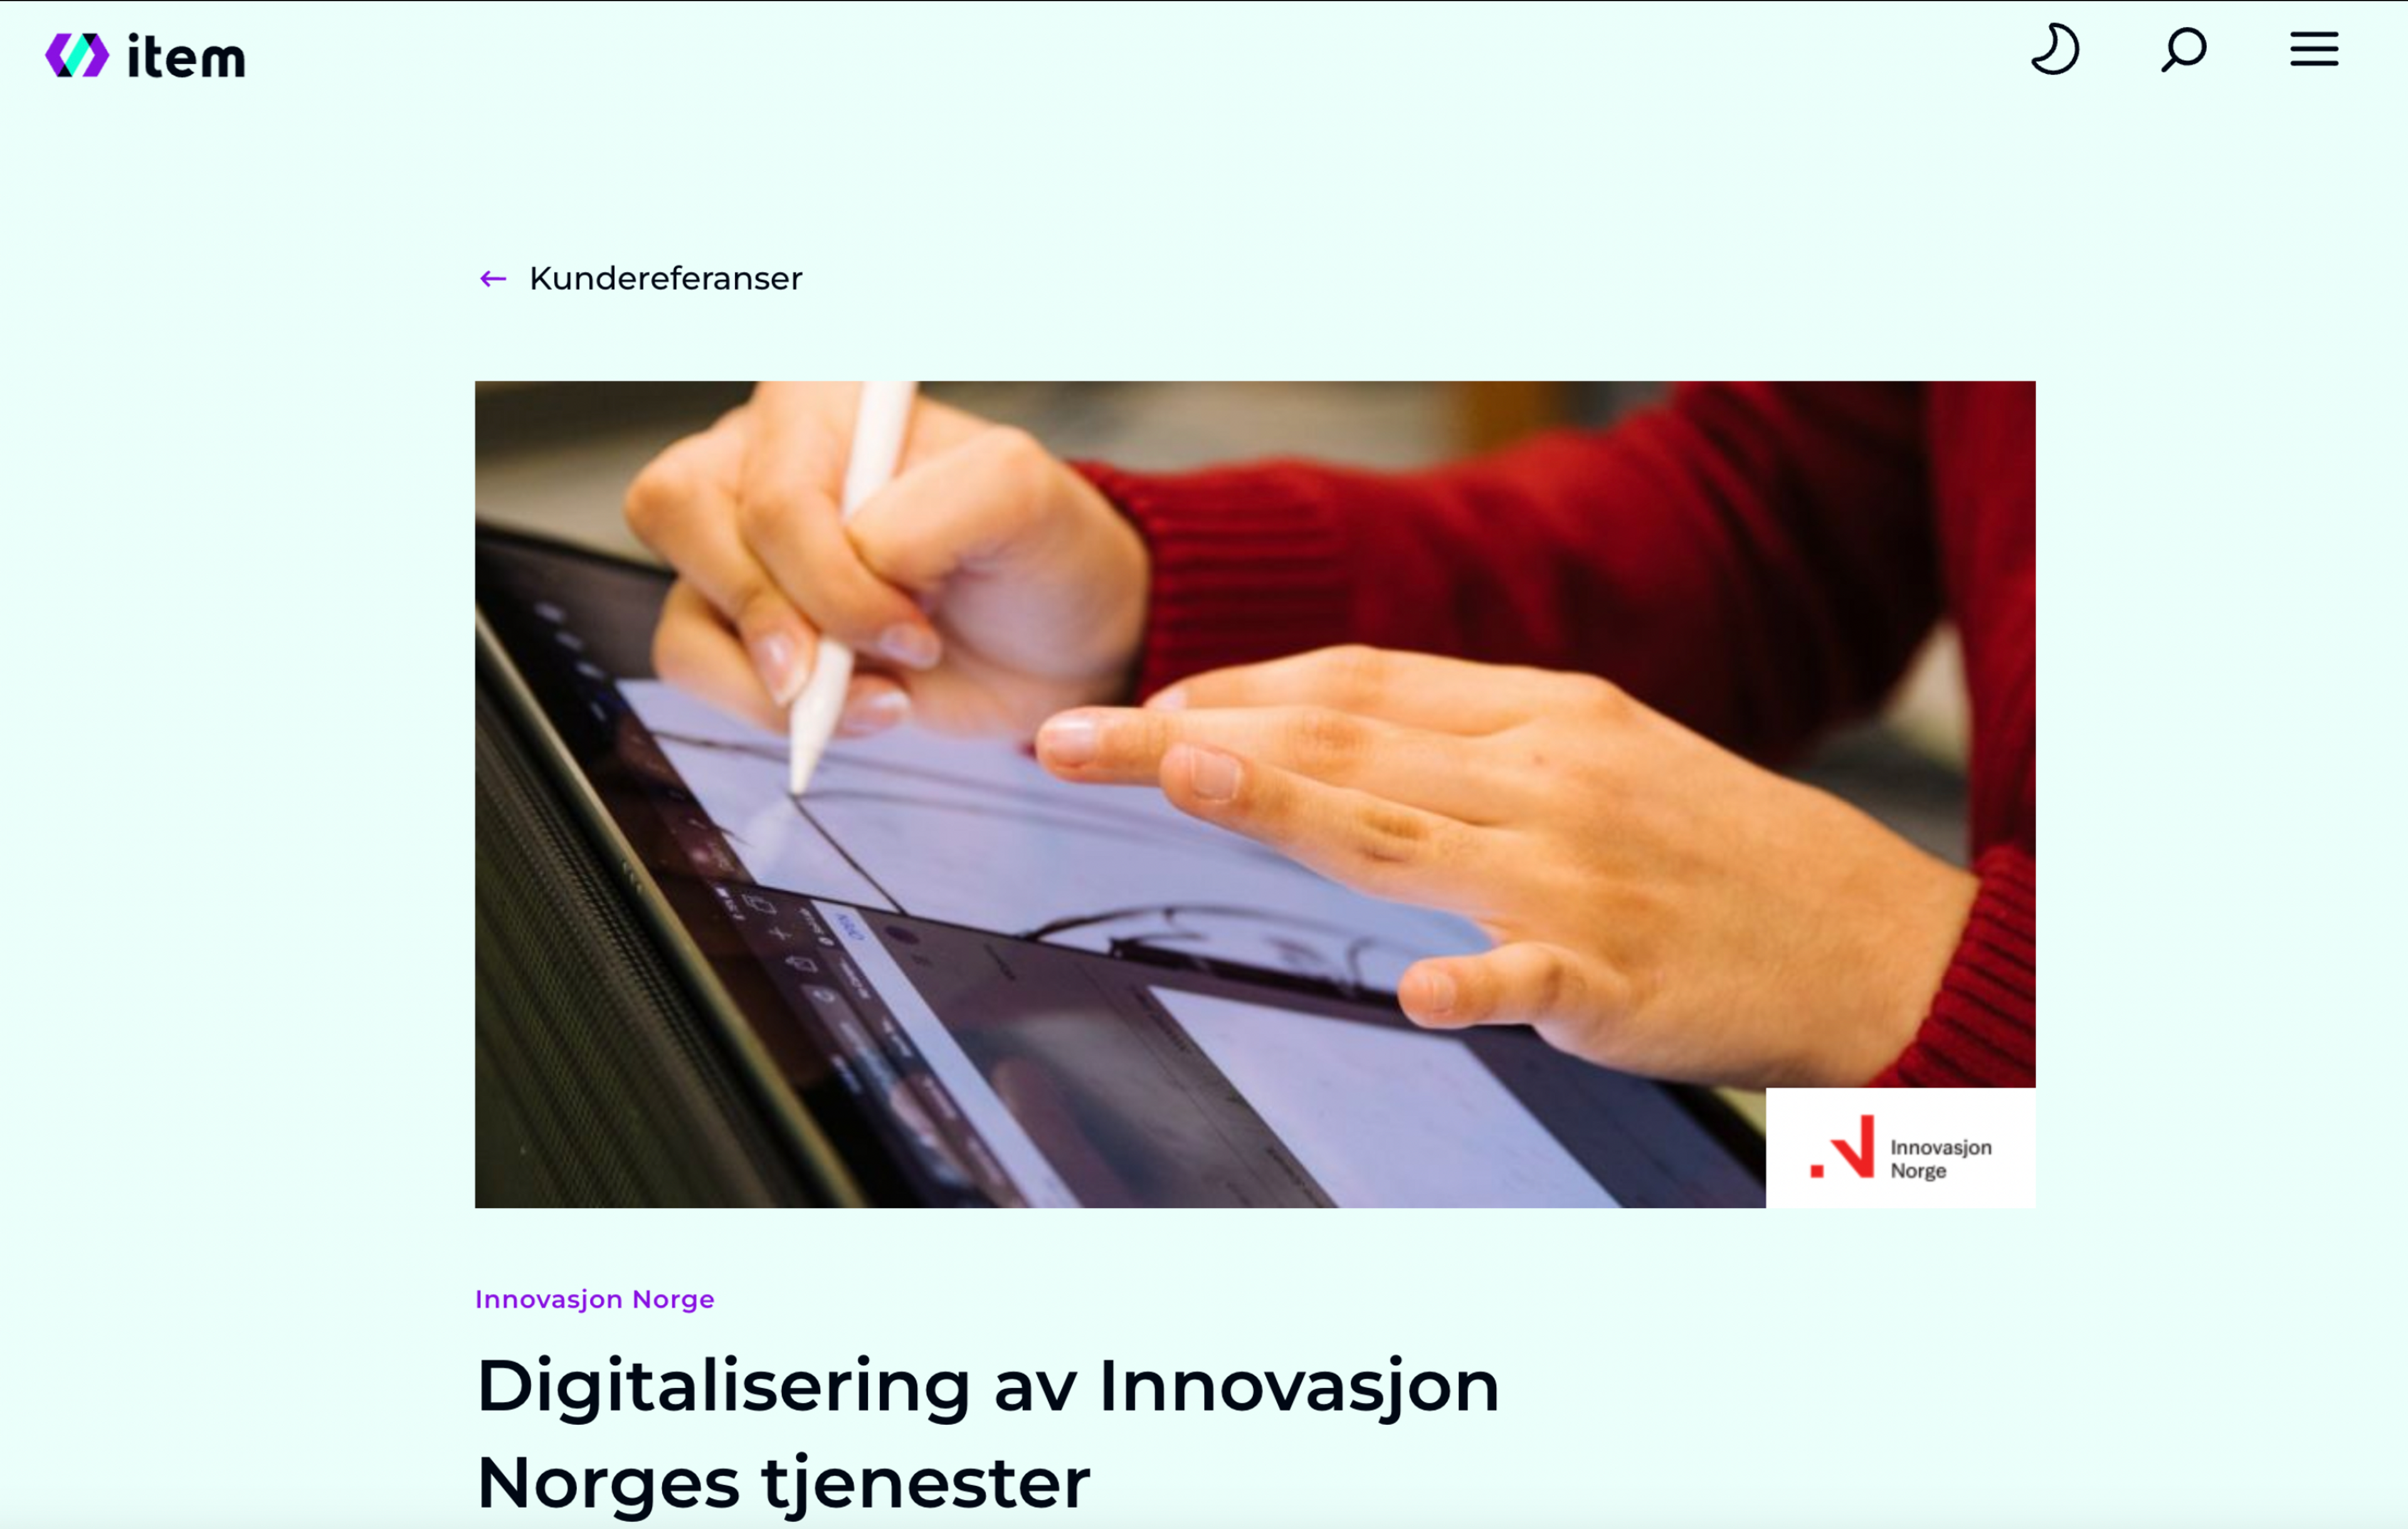 Digitization of Innovation Norway's services